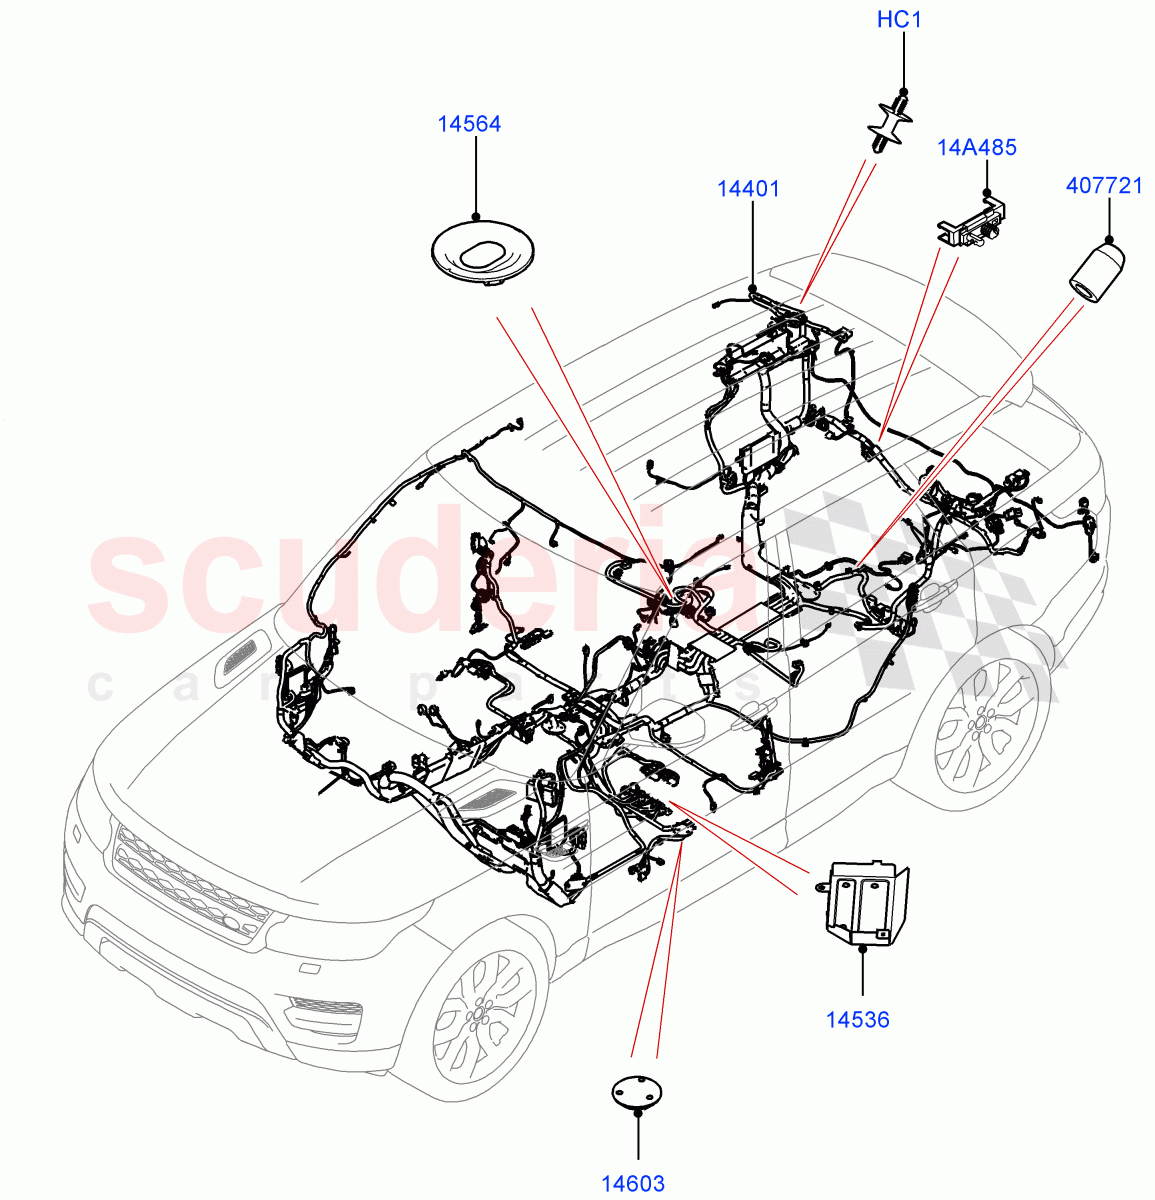 Electrical Wiring - Engine And Dash(Main Harness)((V)TOEA999999) of Land Rover Land Rover Range Rover Sport (2014+) [3.0 Diesel 24V DOHC TC]